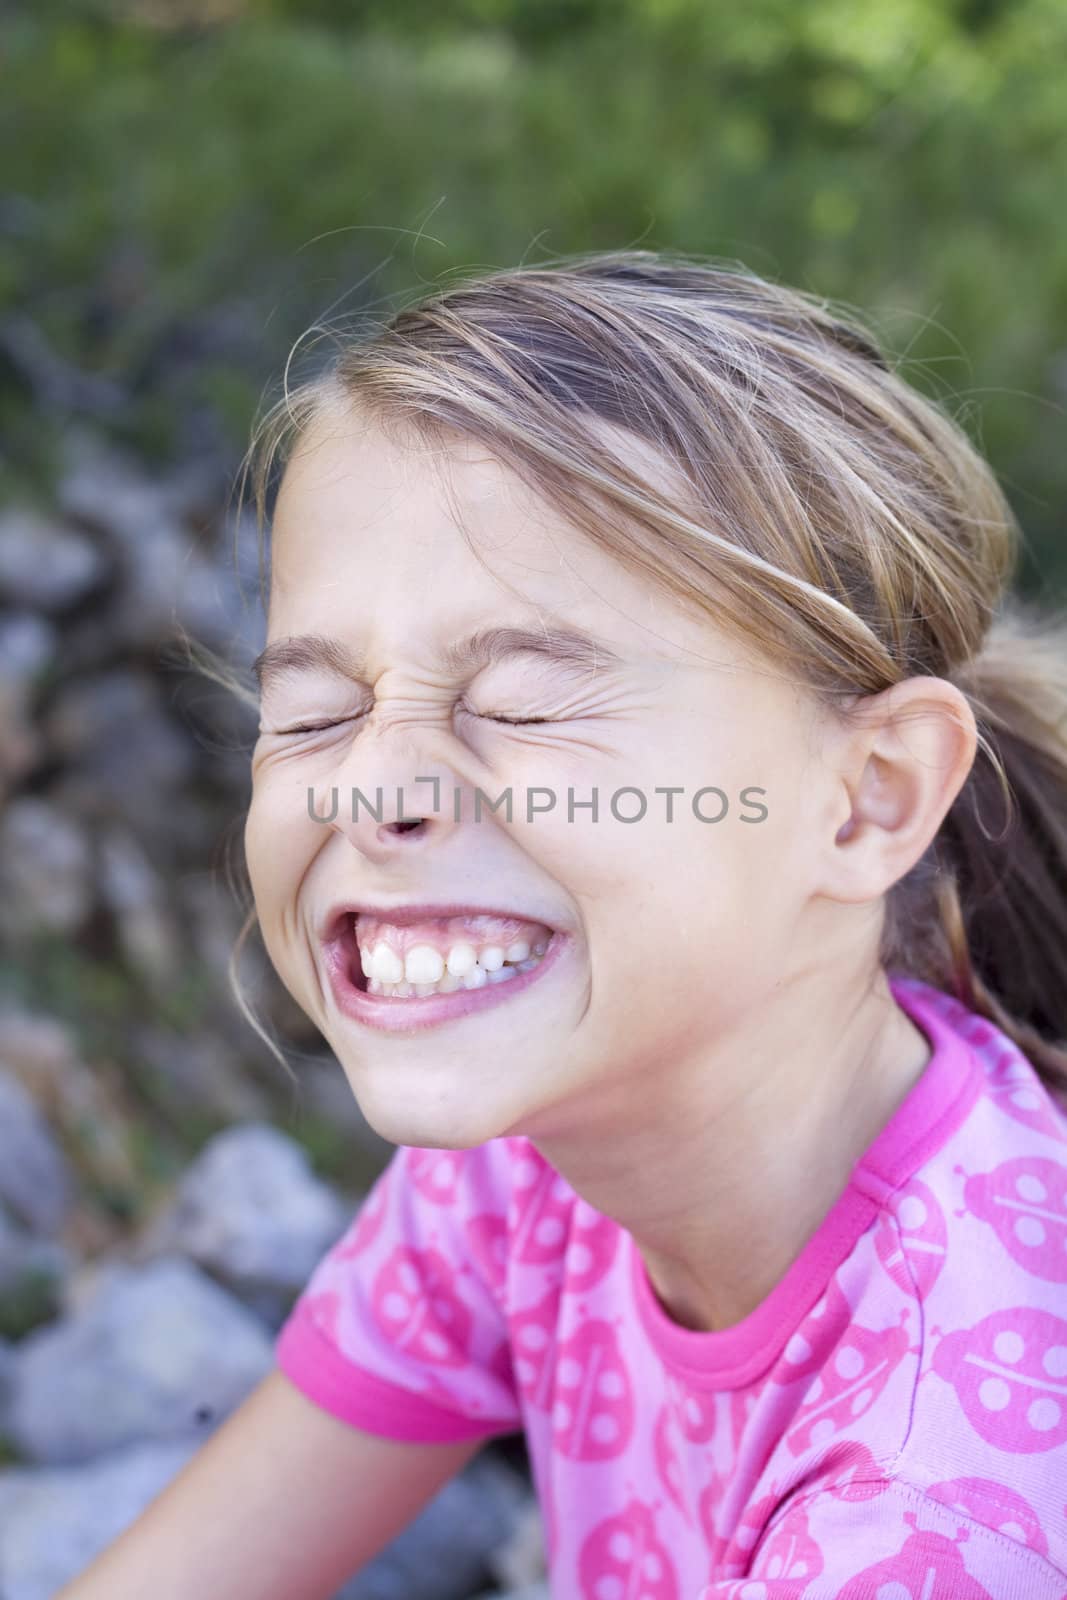 A young girl pulling a funny face